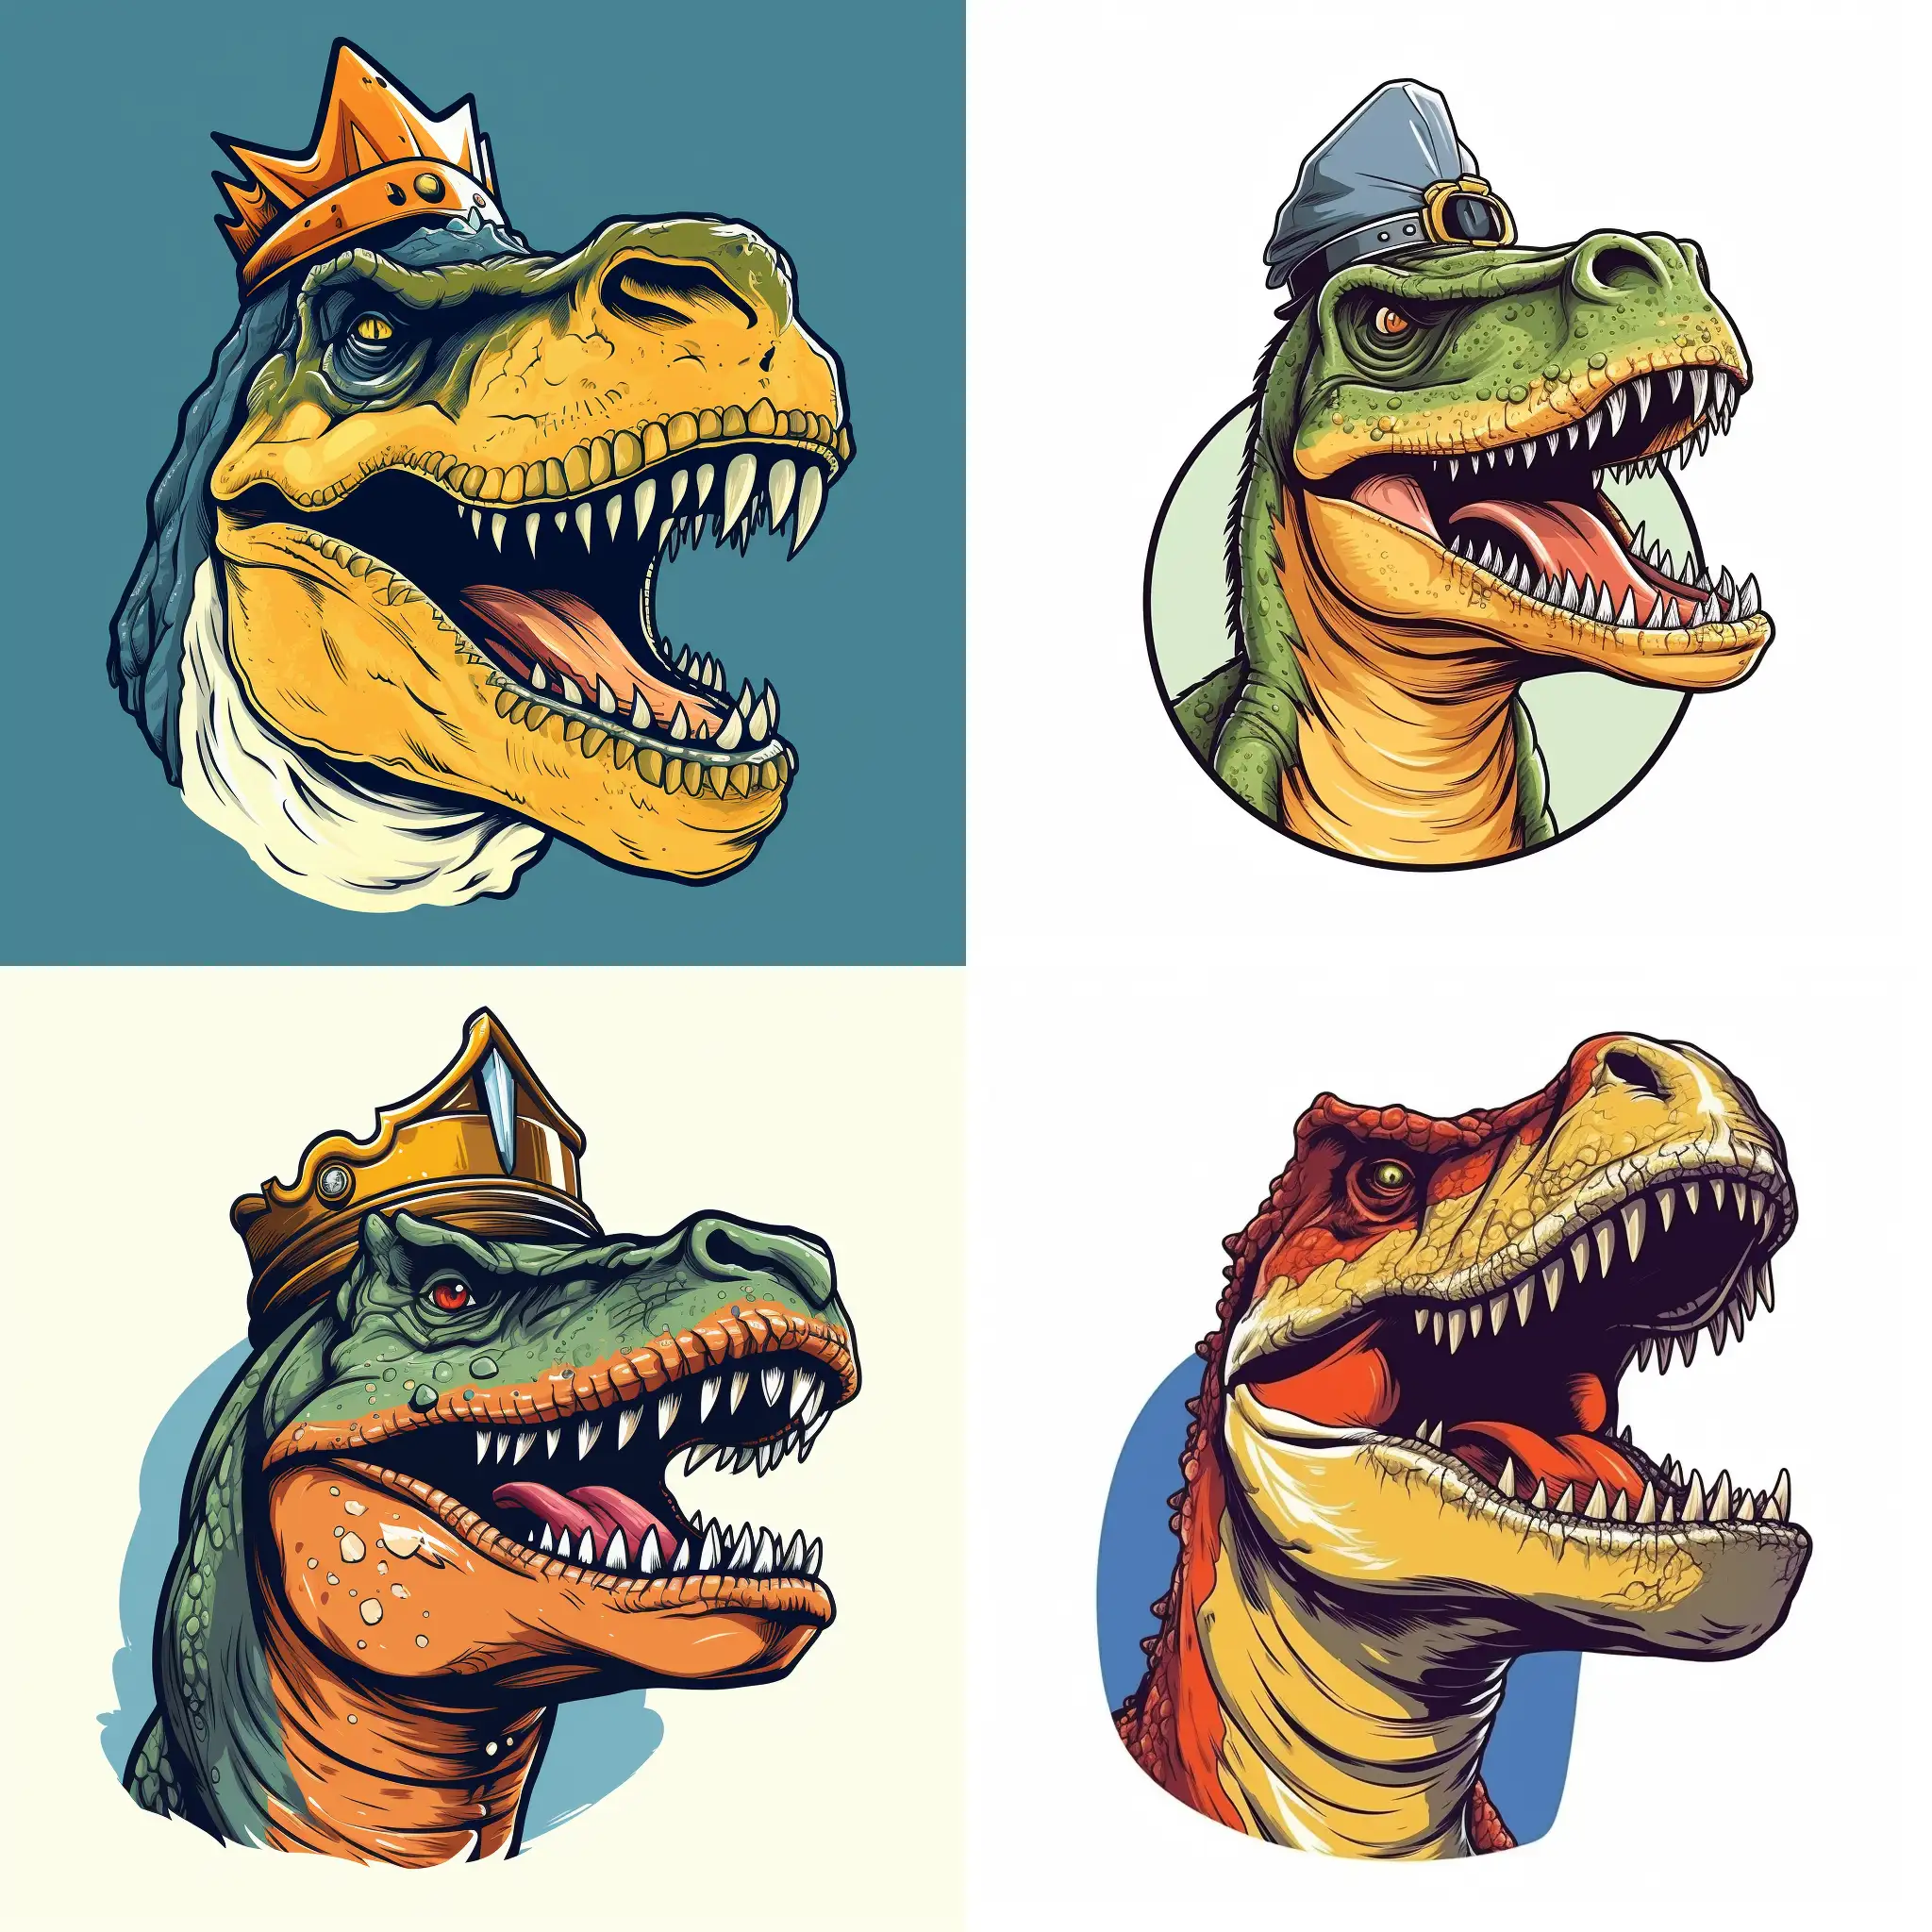 Cheerful-Tyrannosaurus-King-in-Comic-Book-Style-with-Crown